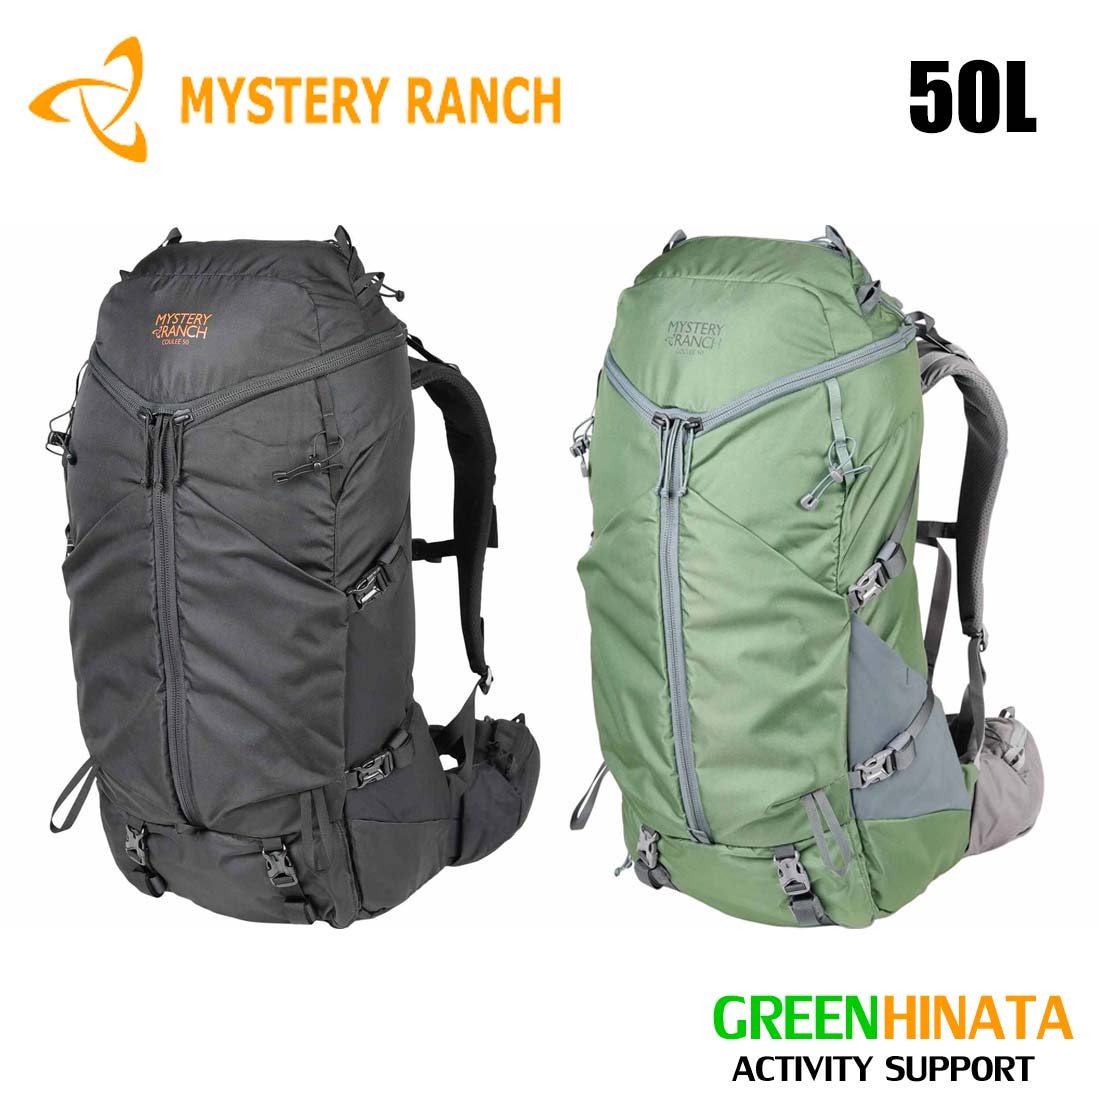 ڥӥ塼ǥѡץ쥼桪ۡڹʡ ߥƥ꡼ ꡼ 50 Хåѥå MYSTERYRANCH COULEE 50